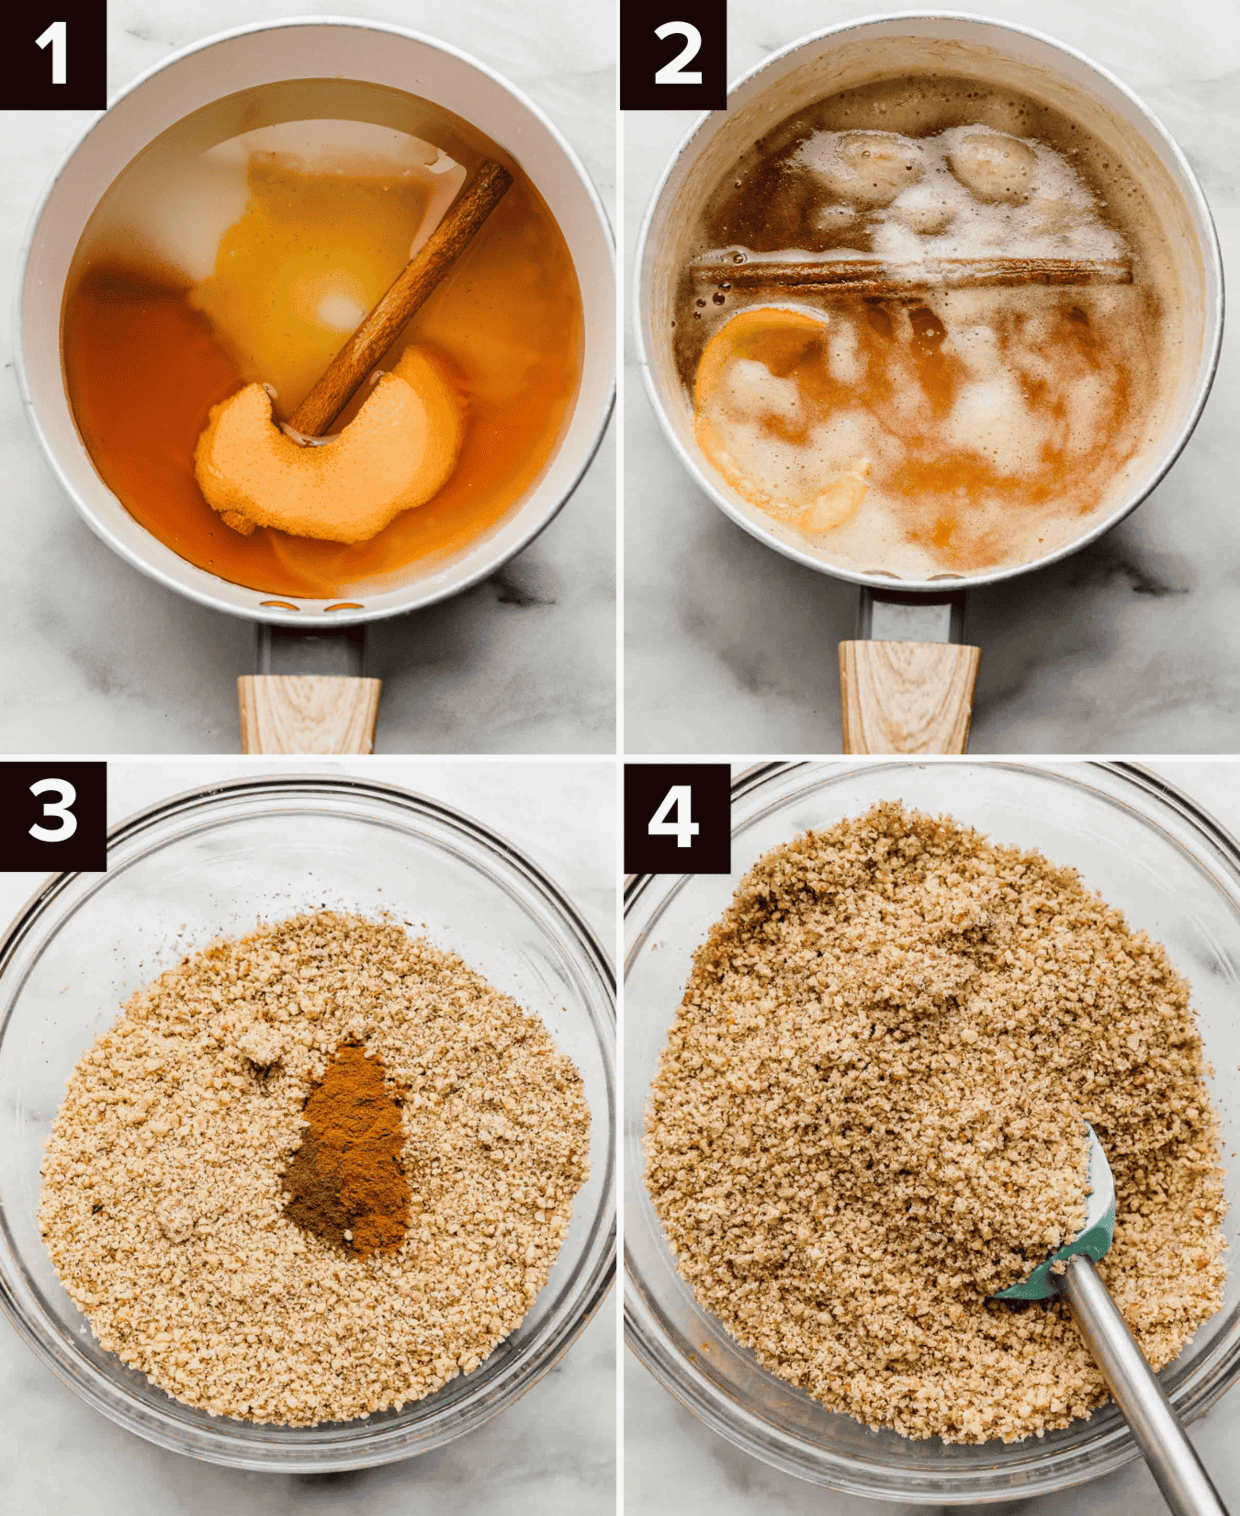 Four photos showing the beginning process of making Greek Baklava, top left photo is white pot with honey, sugar, orange peel and cinnamon stick in it, top right photo is the liquid boiling; bottom left: glass bowl with crushed walnuts in it and ground spices, bottom right photo is glass bowl with ground walnuts in it.